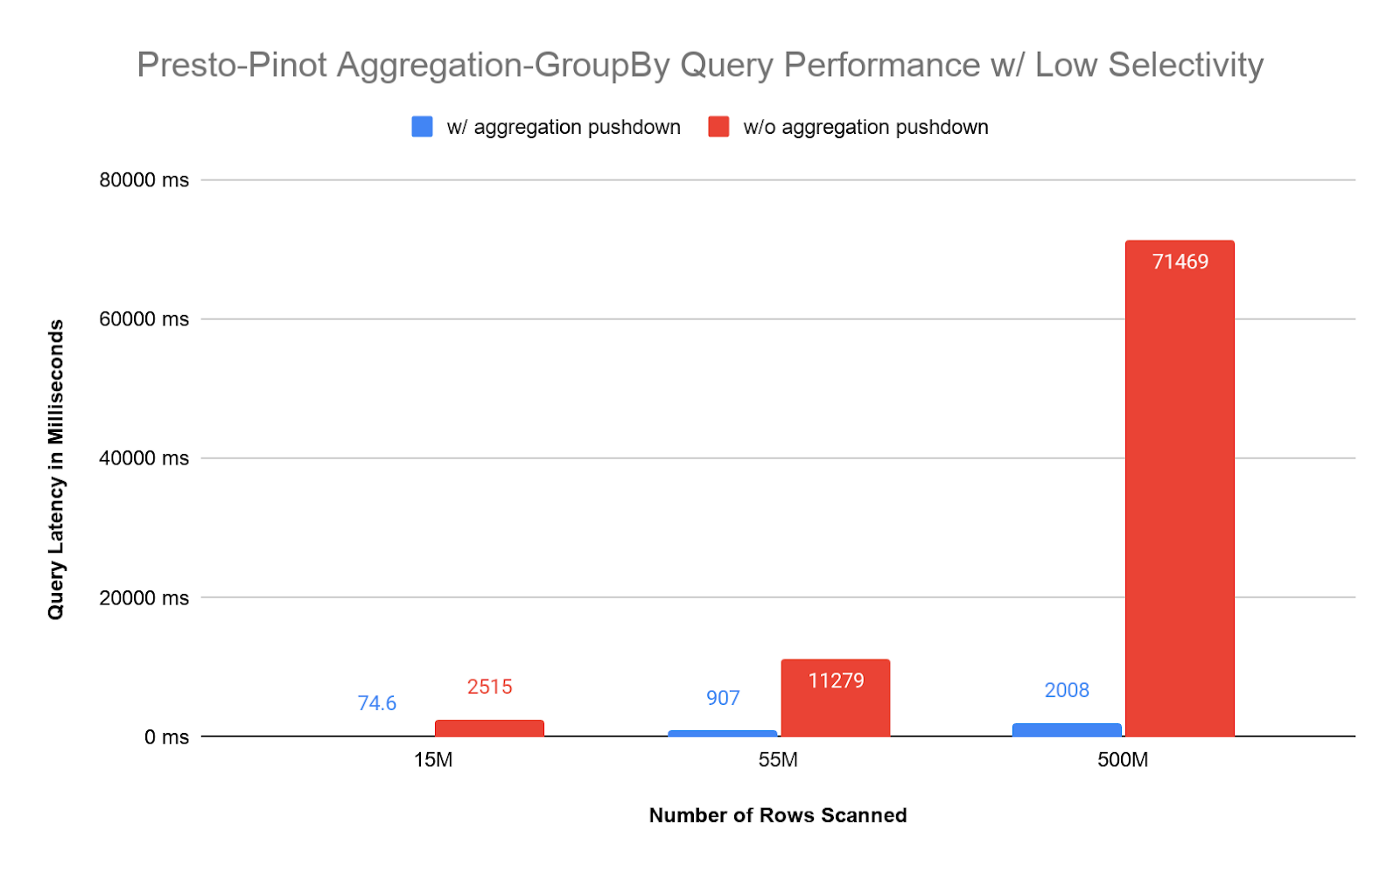 Presto Pinot aggregation group by query performance with low selectivity